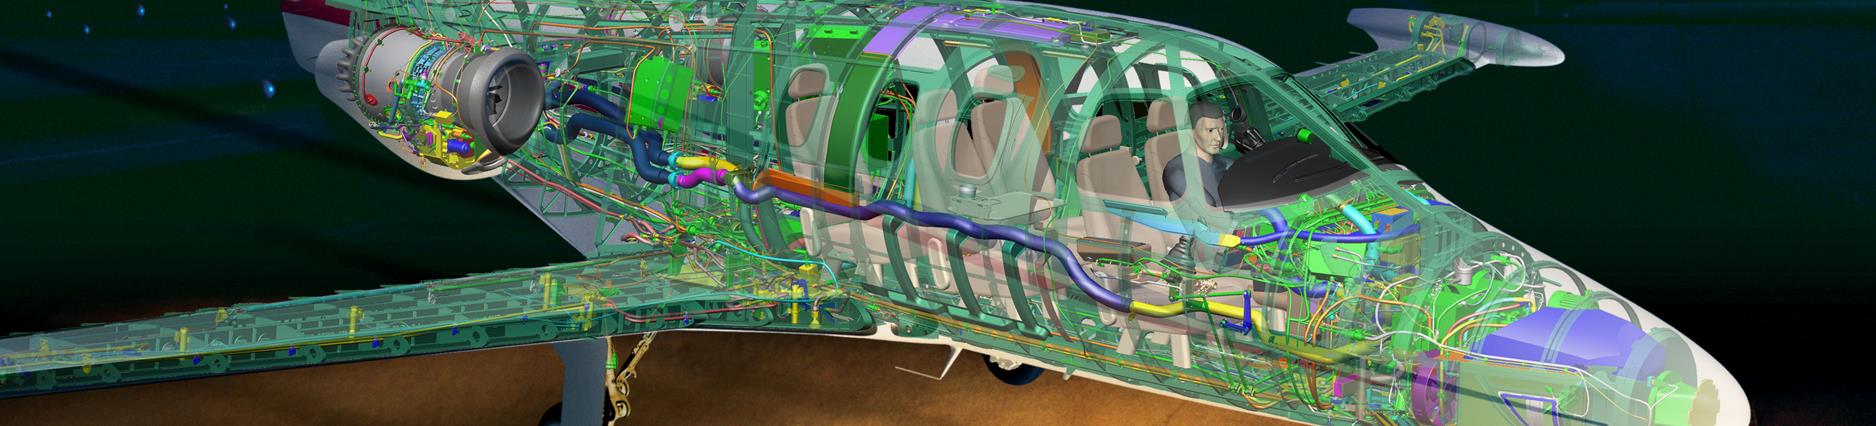 Siemens Solutions are Mission-critical within the Aerospace Industry Top Engine Manufacturers Engineering Collaboration GE NX TEAMCENTER Pratt Whitney NX TEAMCENTER Rolls-Royce NX TEAMCENTER MTU Aero